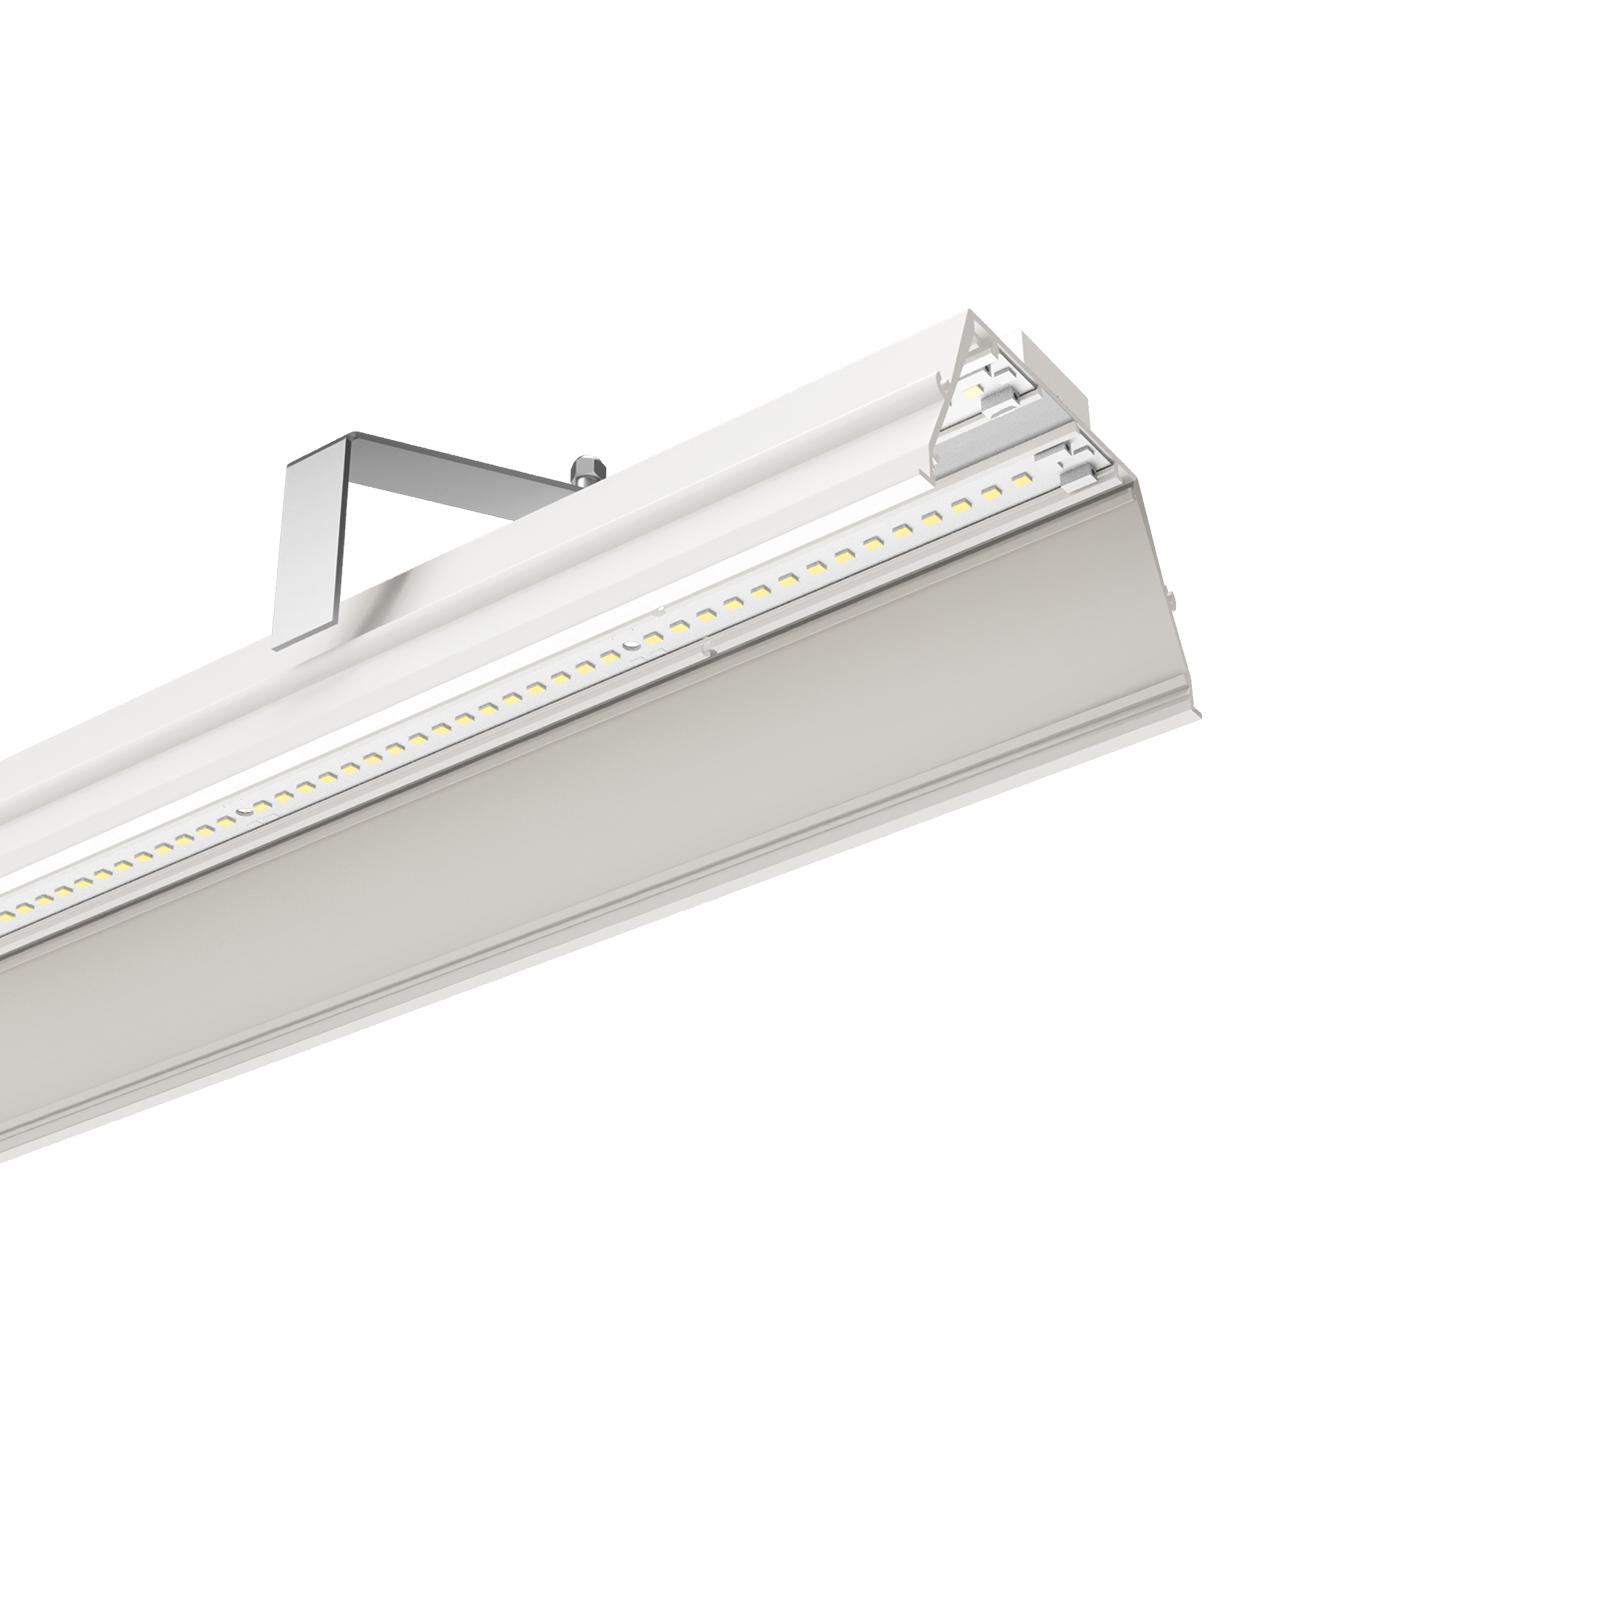 Gallery Rollip Linear Light System Linealightgroup 1200X1200 13